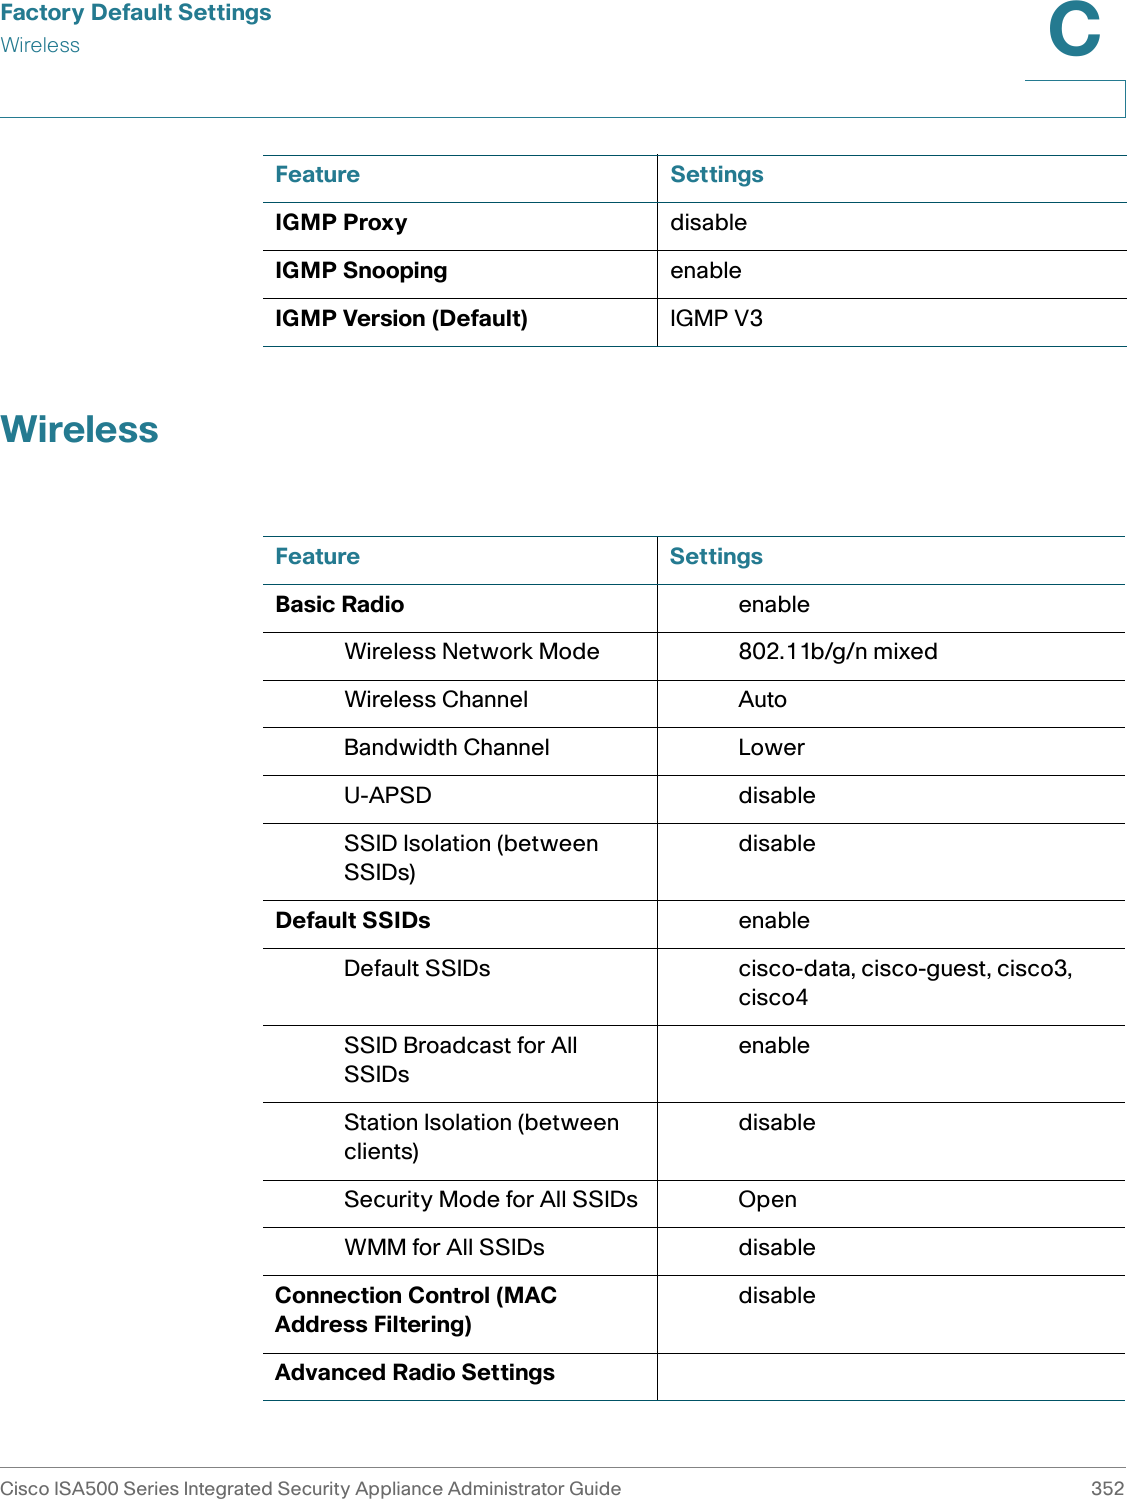 Factory Default SettingsWirelessCisco ISA500 Series Integrated Security Appliance Administrator Guide 352C WirelessIGMP Proxy disableIGMP Snooping enableIGMP Version (Default) IGMP V3Feature SettingsFeature SettingsBasic Radio enableWireless Network Mode 802.11b/g/n mixed Wireless Channel AutoBandwidth Channel LowerU-APSD disableSSID Isolation (between SSIDs)disableDefault SSIDs enableDefault SSIDs cisco-data, cisco-guest, cisco3, cisco4SSID Broadcast for All SSIDsenableStation Isolation (between clients)disableSecurity Mode for All SSIDs OpenWMM for All SSIDs disableConnection Control (MAC Address Filtering)disableAdvanced Radio Settings